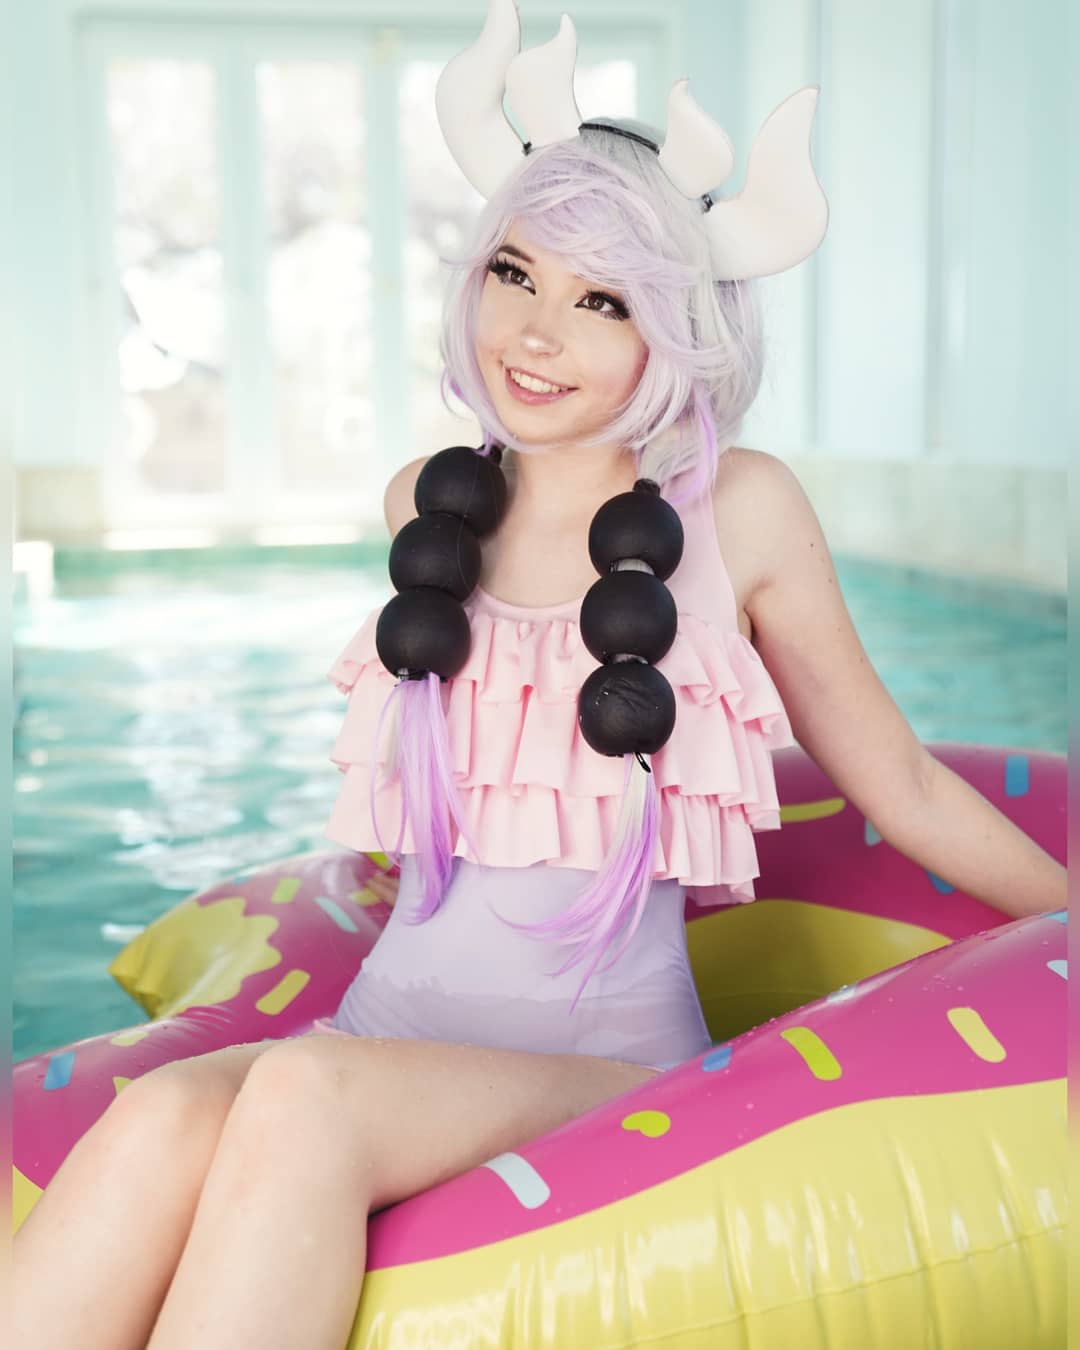 51 Sexy Belle Delphine Boobs Pictures Will Heat Up Your Blood With Fire And Energy For This Sexy Diva 44